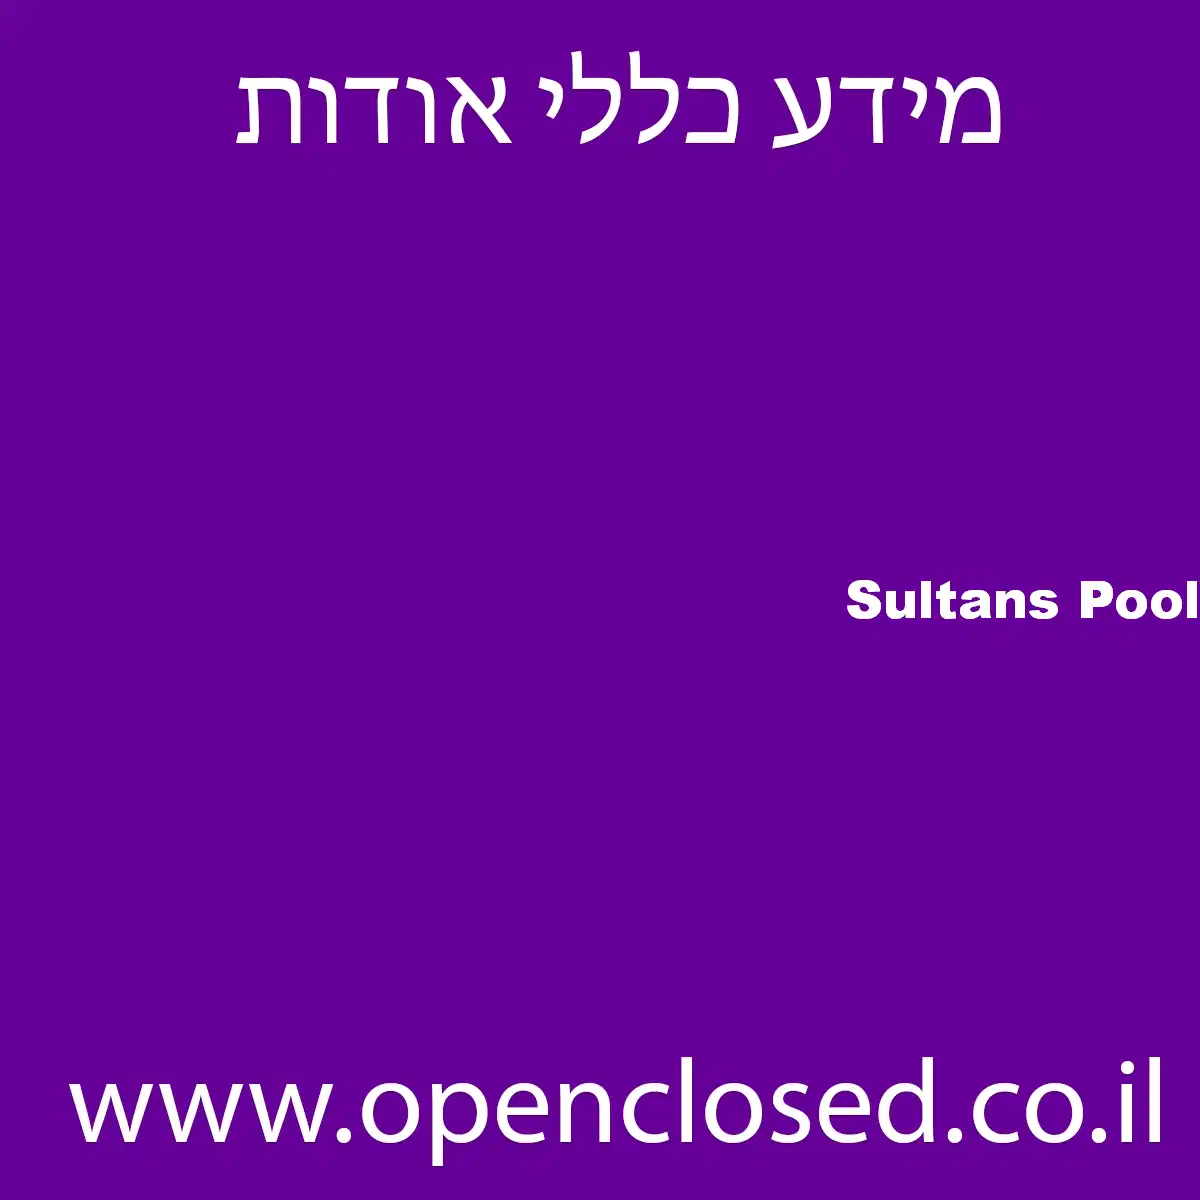 Sultans Pool